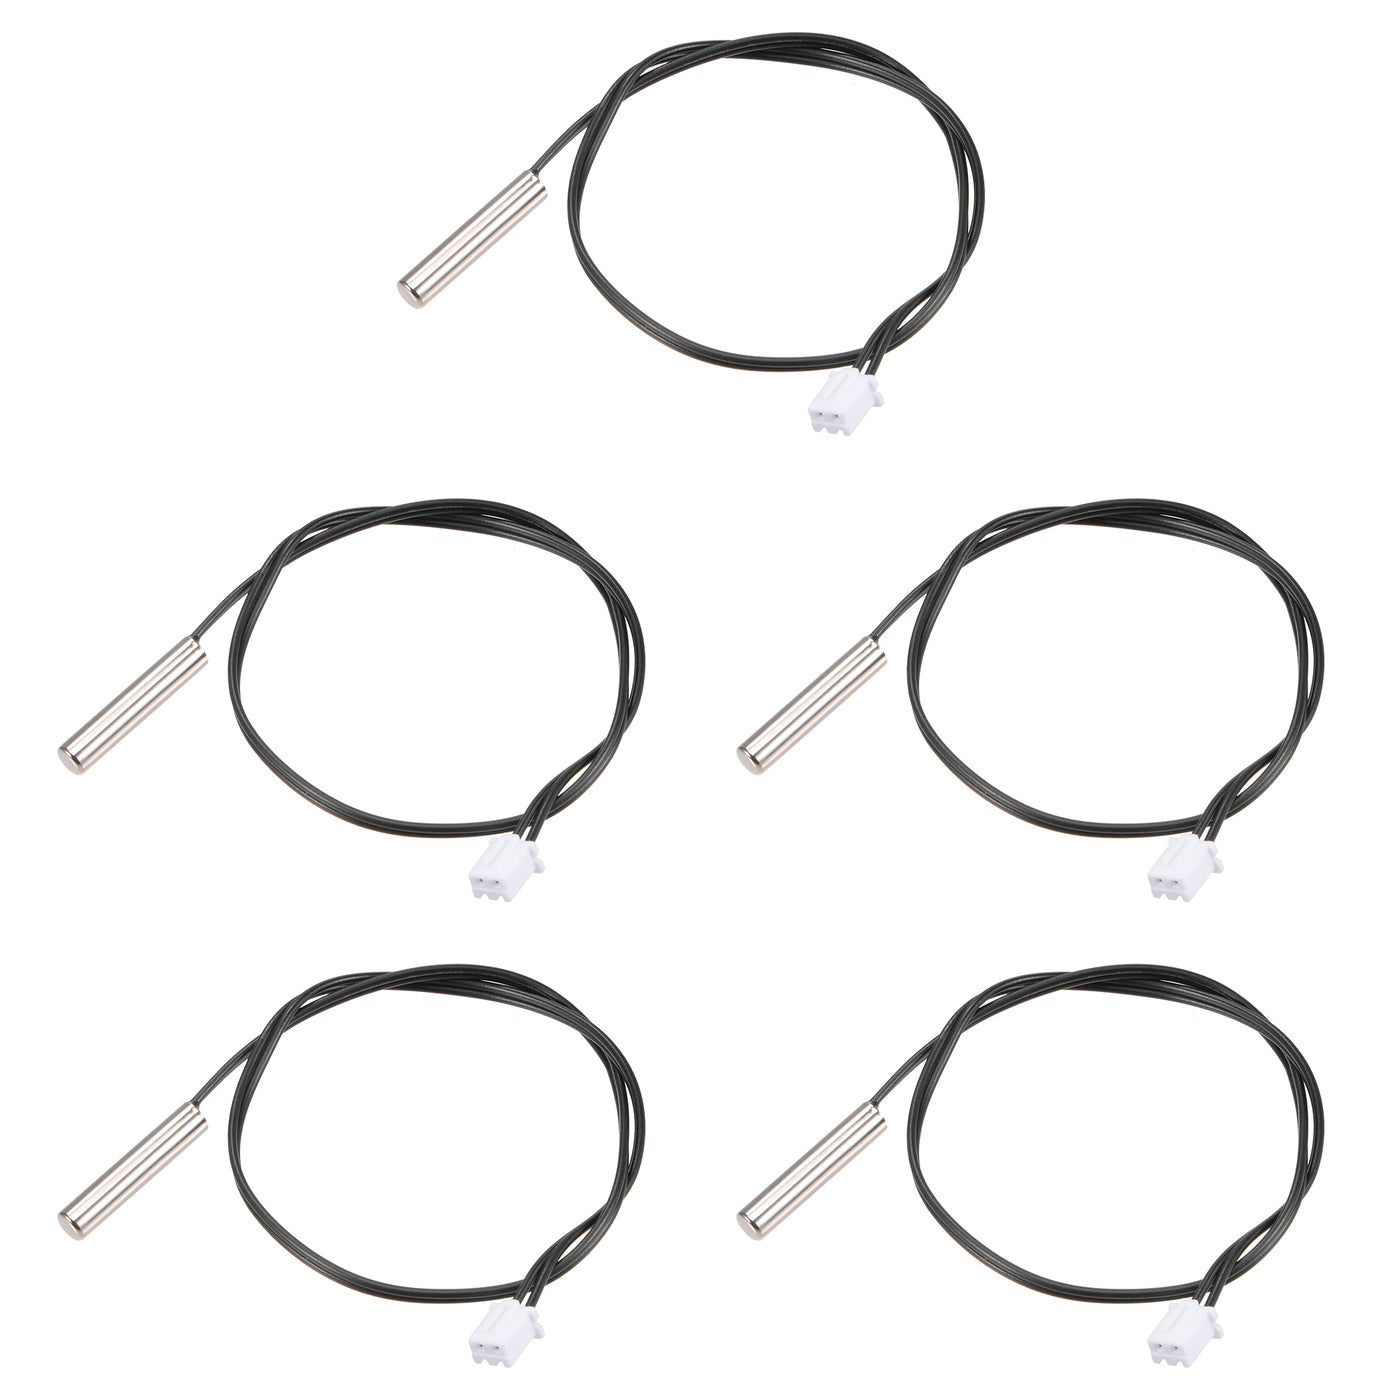 uxcell Uxcell 5pcs 20K Temperature Sensor Probe, Stainless Steel NTC Thermal Sensor Probe 30cm Digital Thermometer Extension Cable